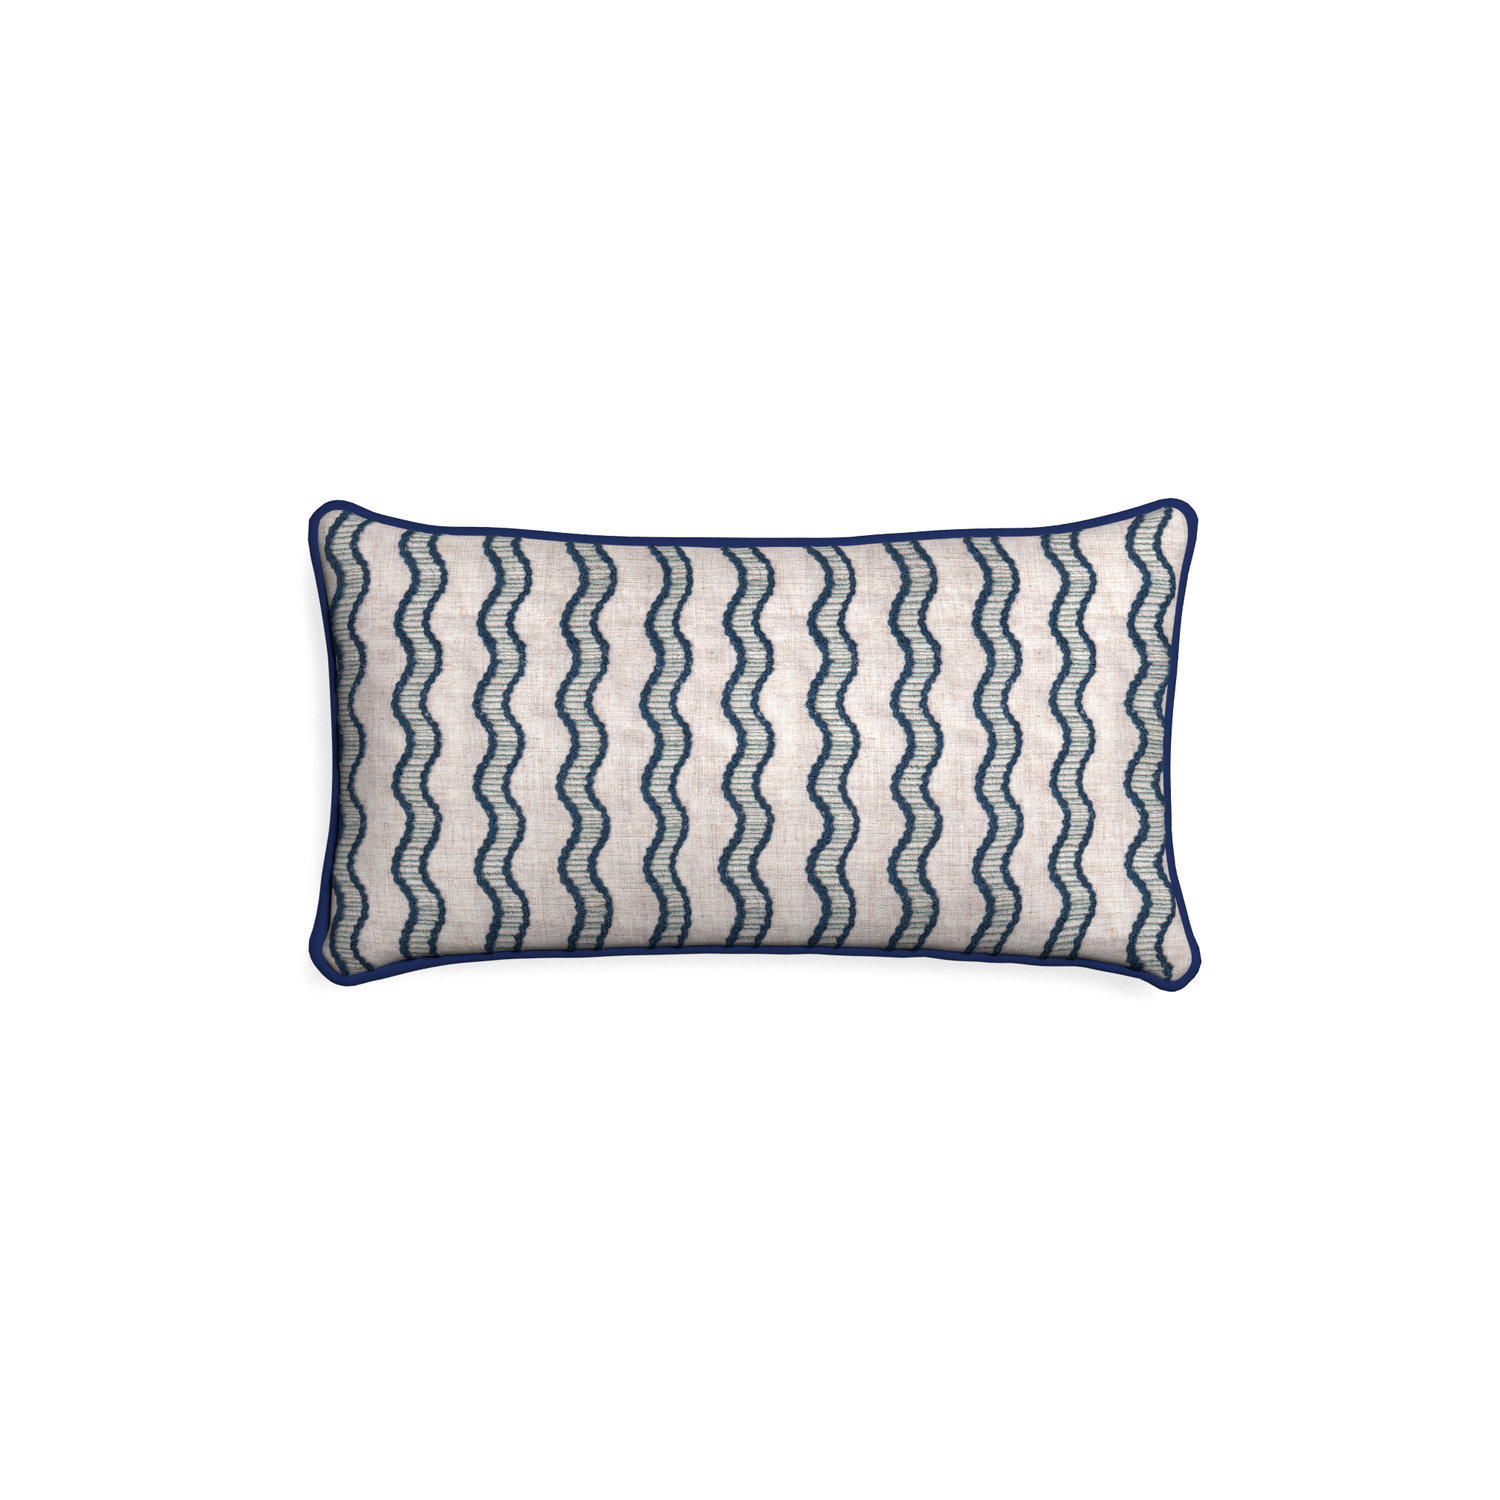 Petite-lumbar beatrice custom embroidered wavepillow with midnight piping on white background